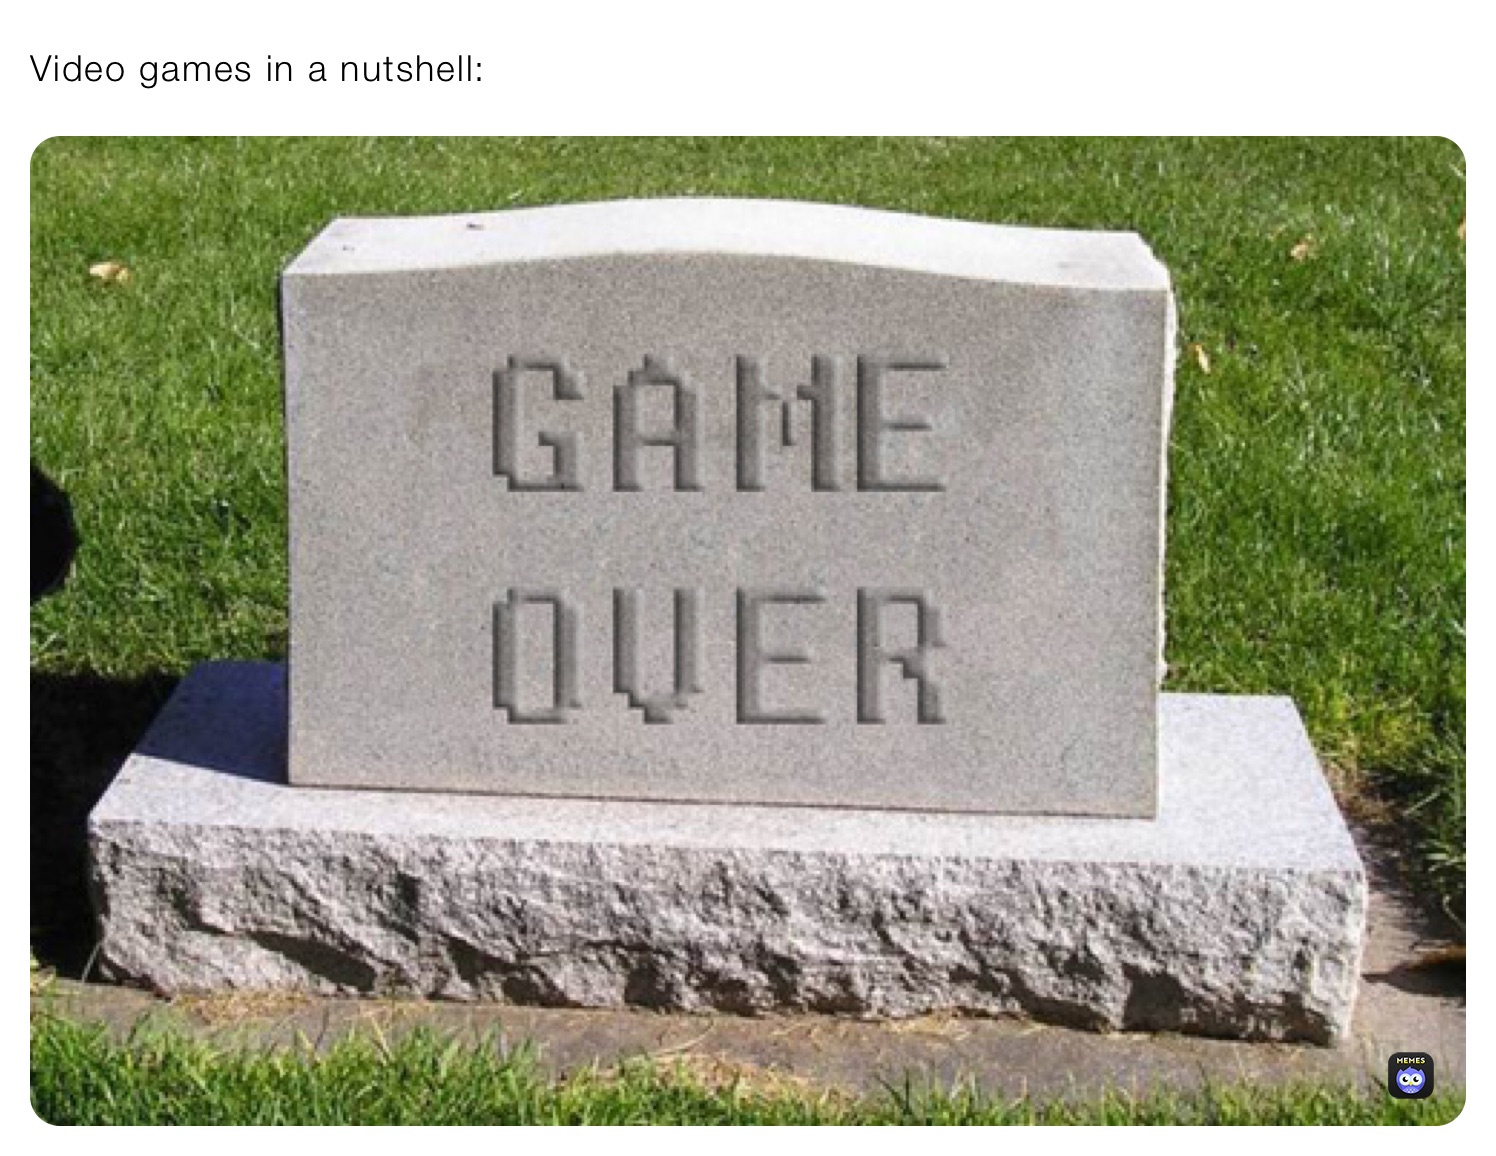 Video games in a nutshell: